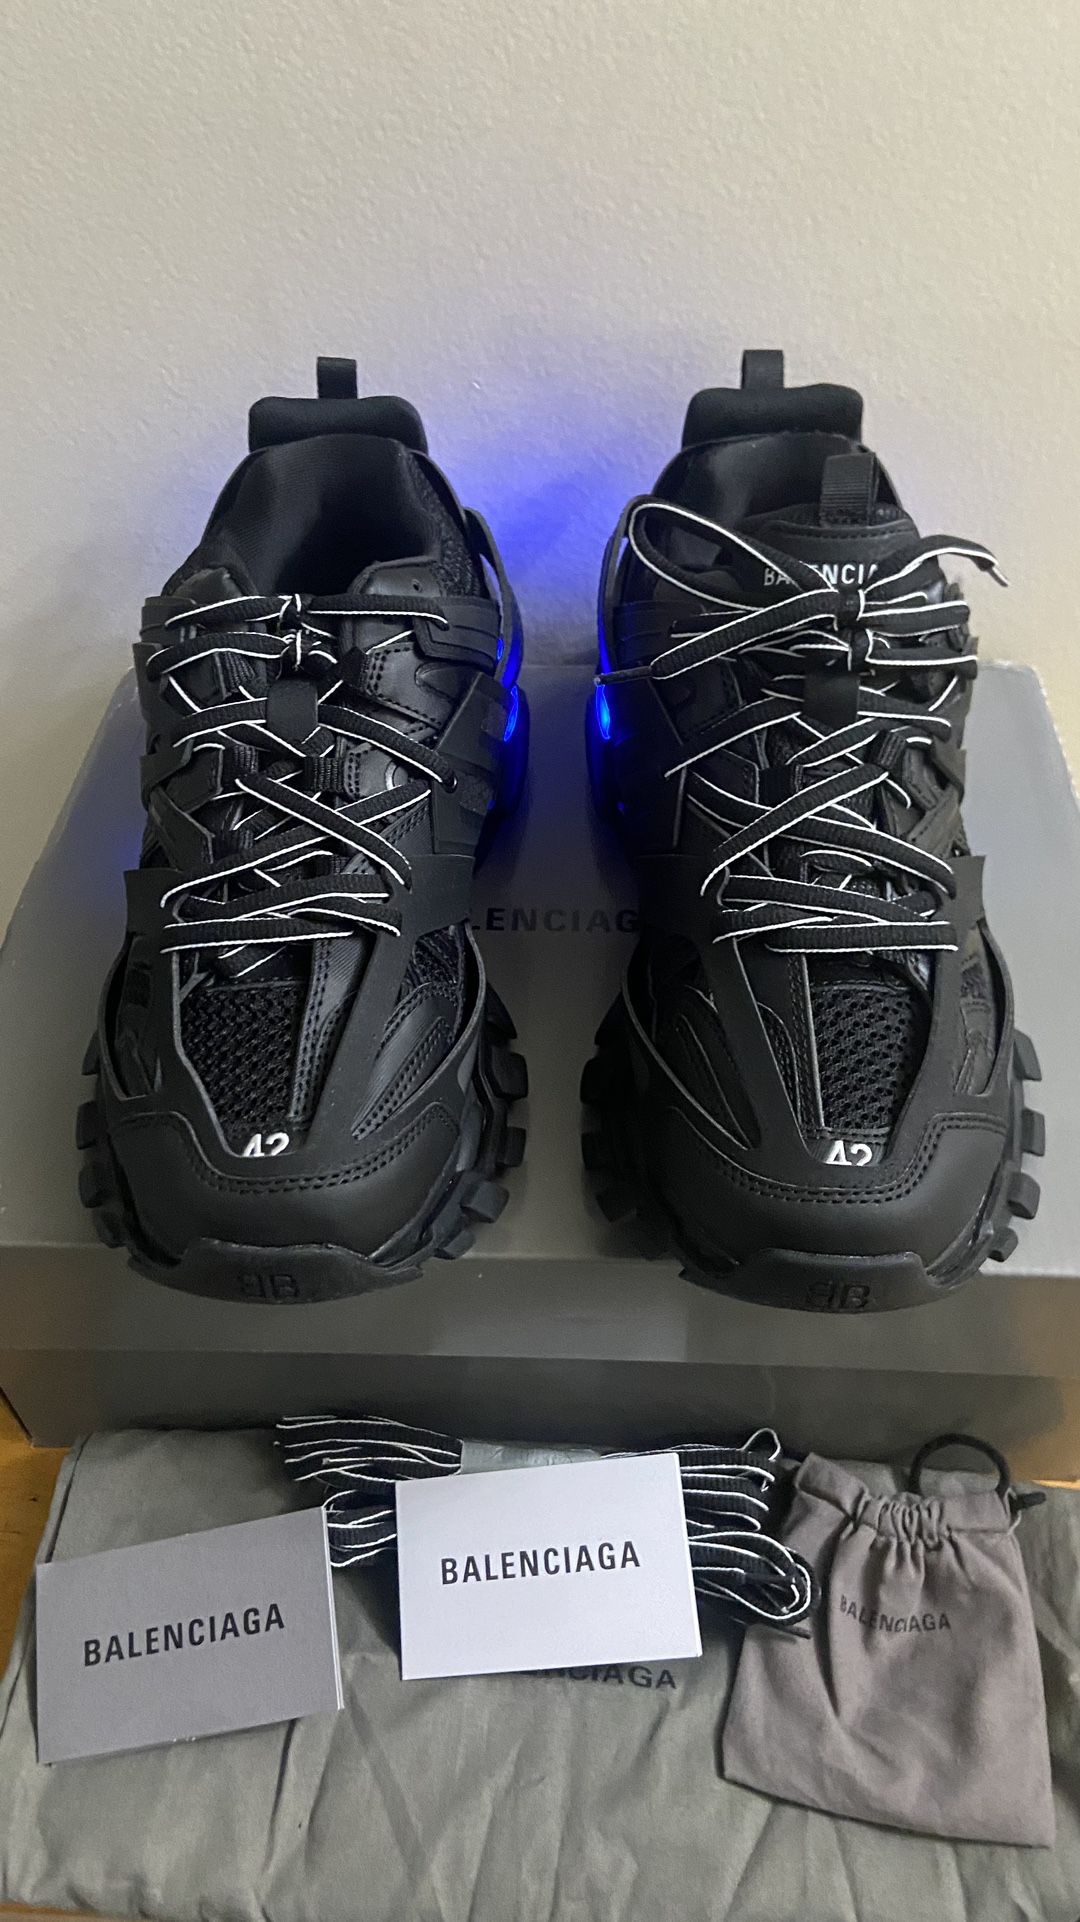 Balenciaga LED Track Runners Black Size 9 10 11 42 43 44 for 